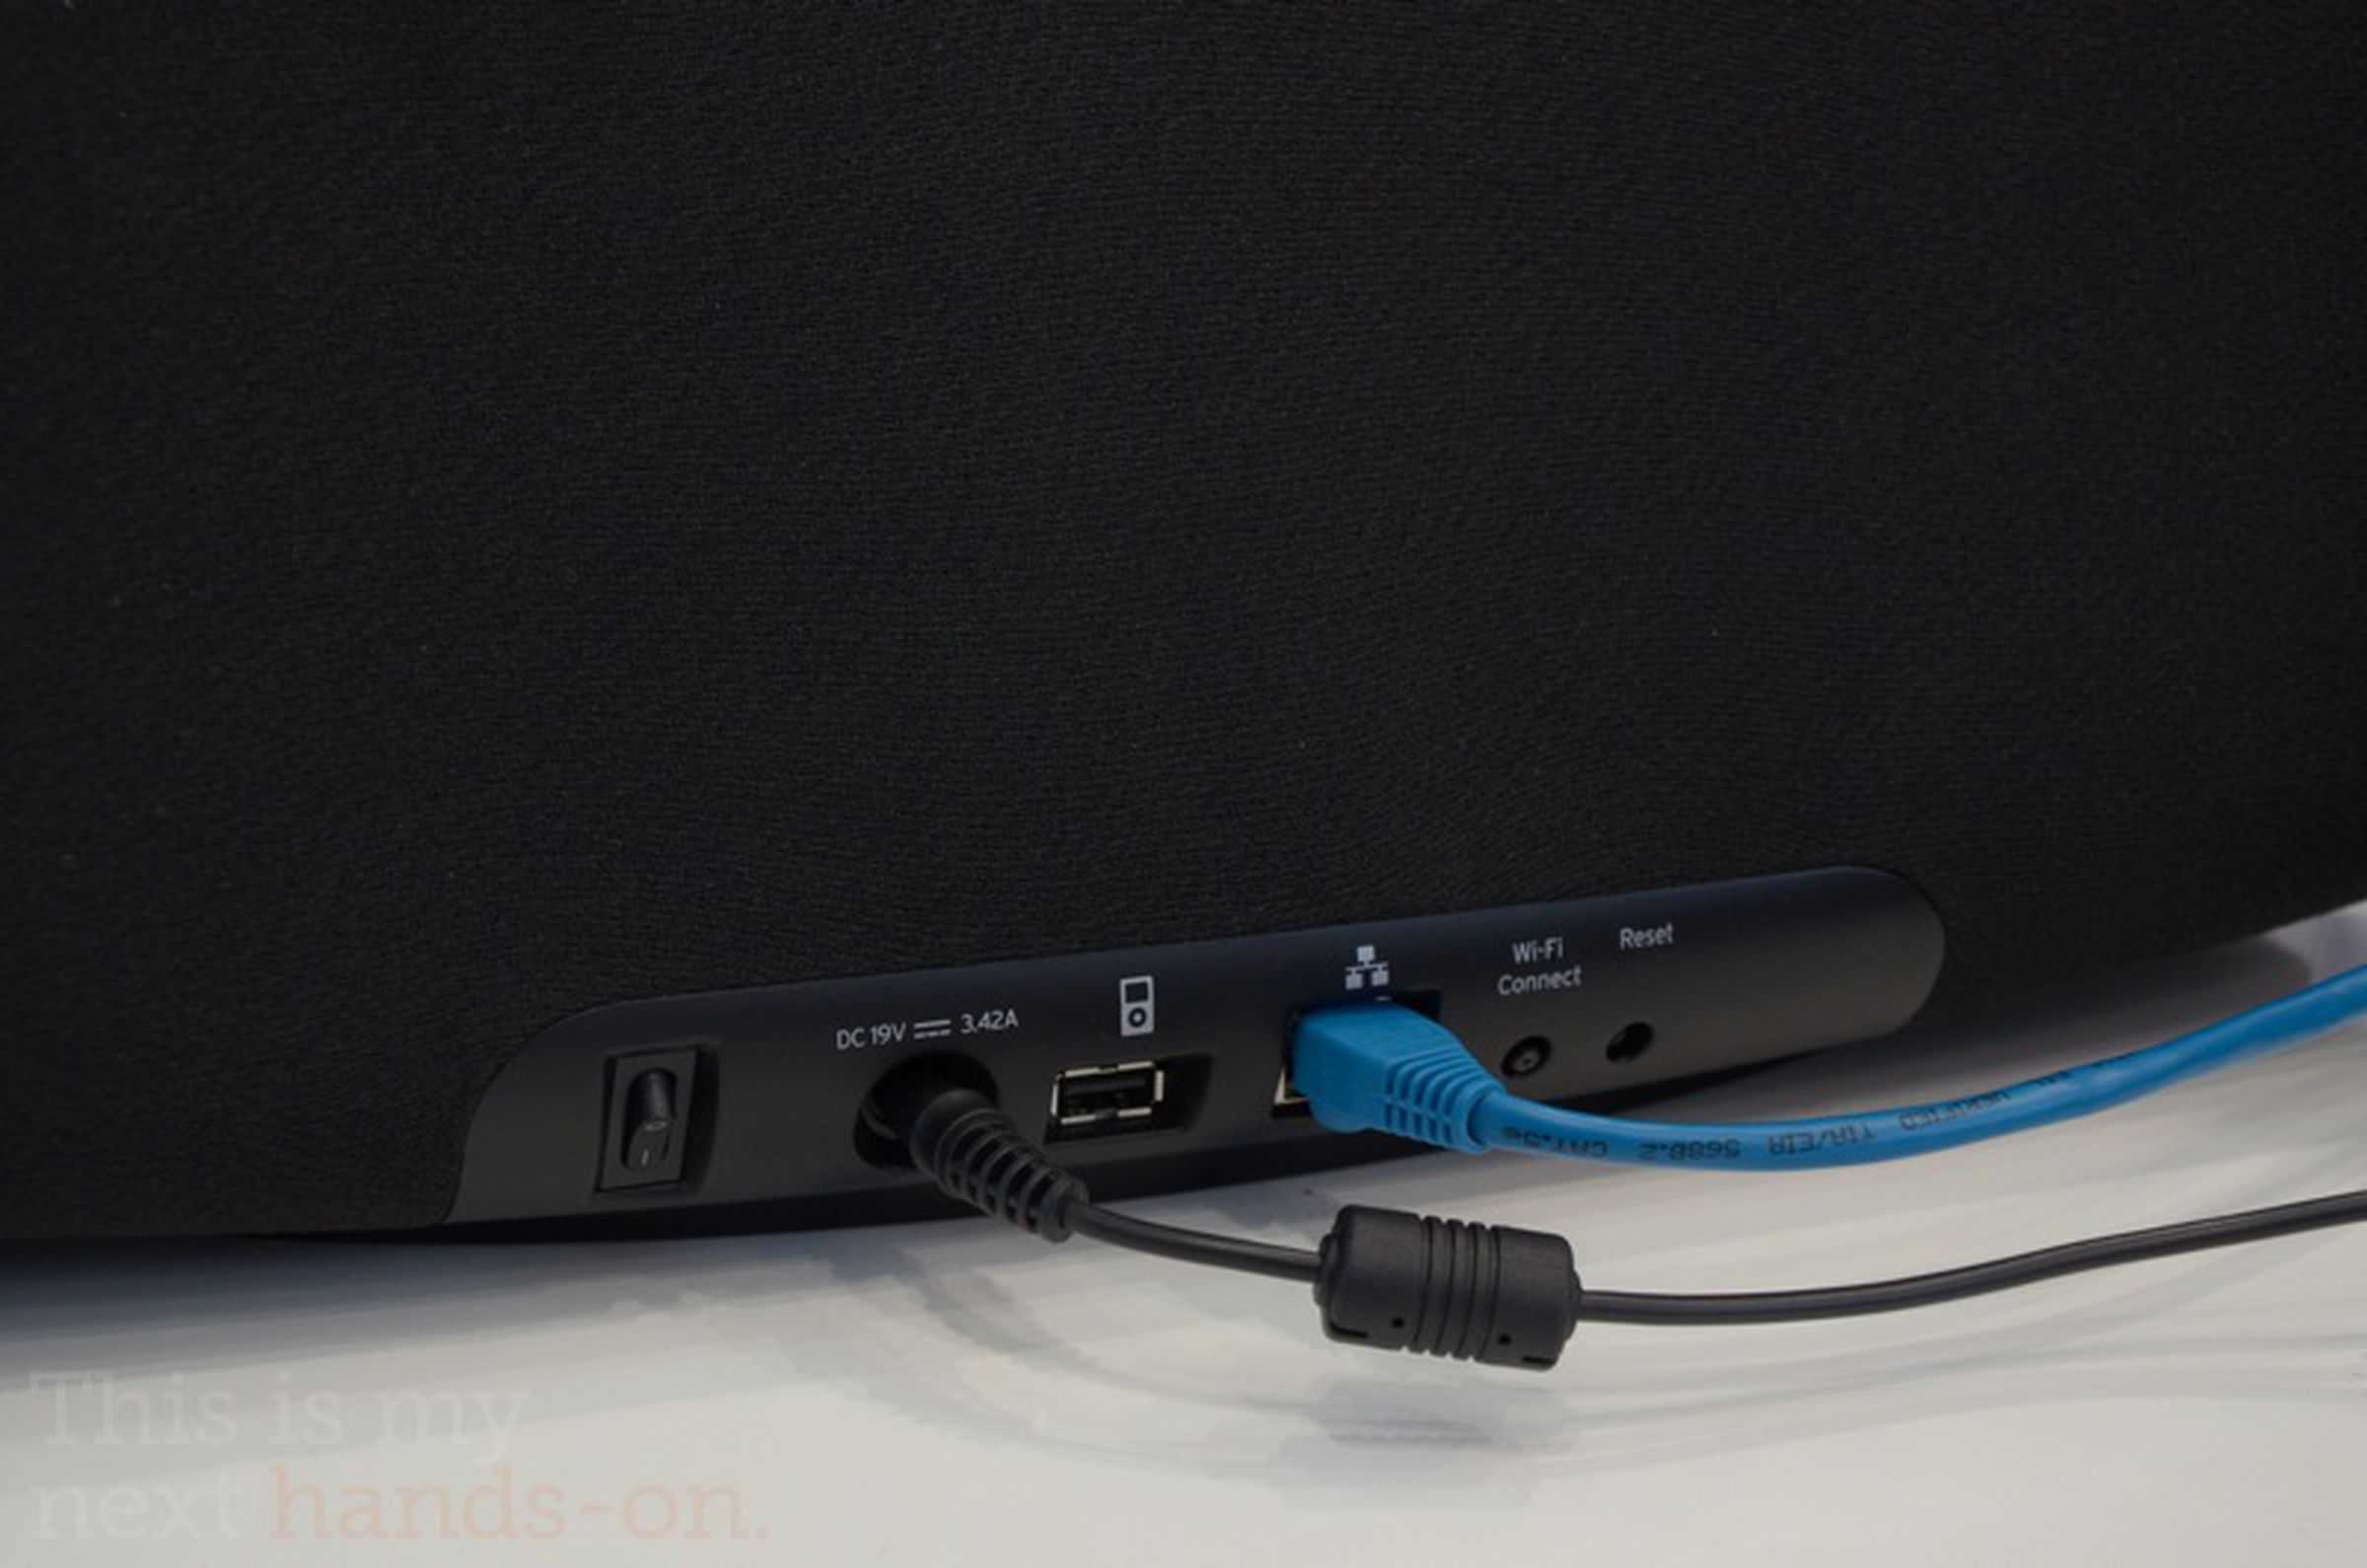 Altec Lansing inAir 5000 hands on pictures